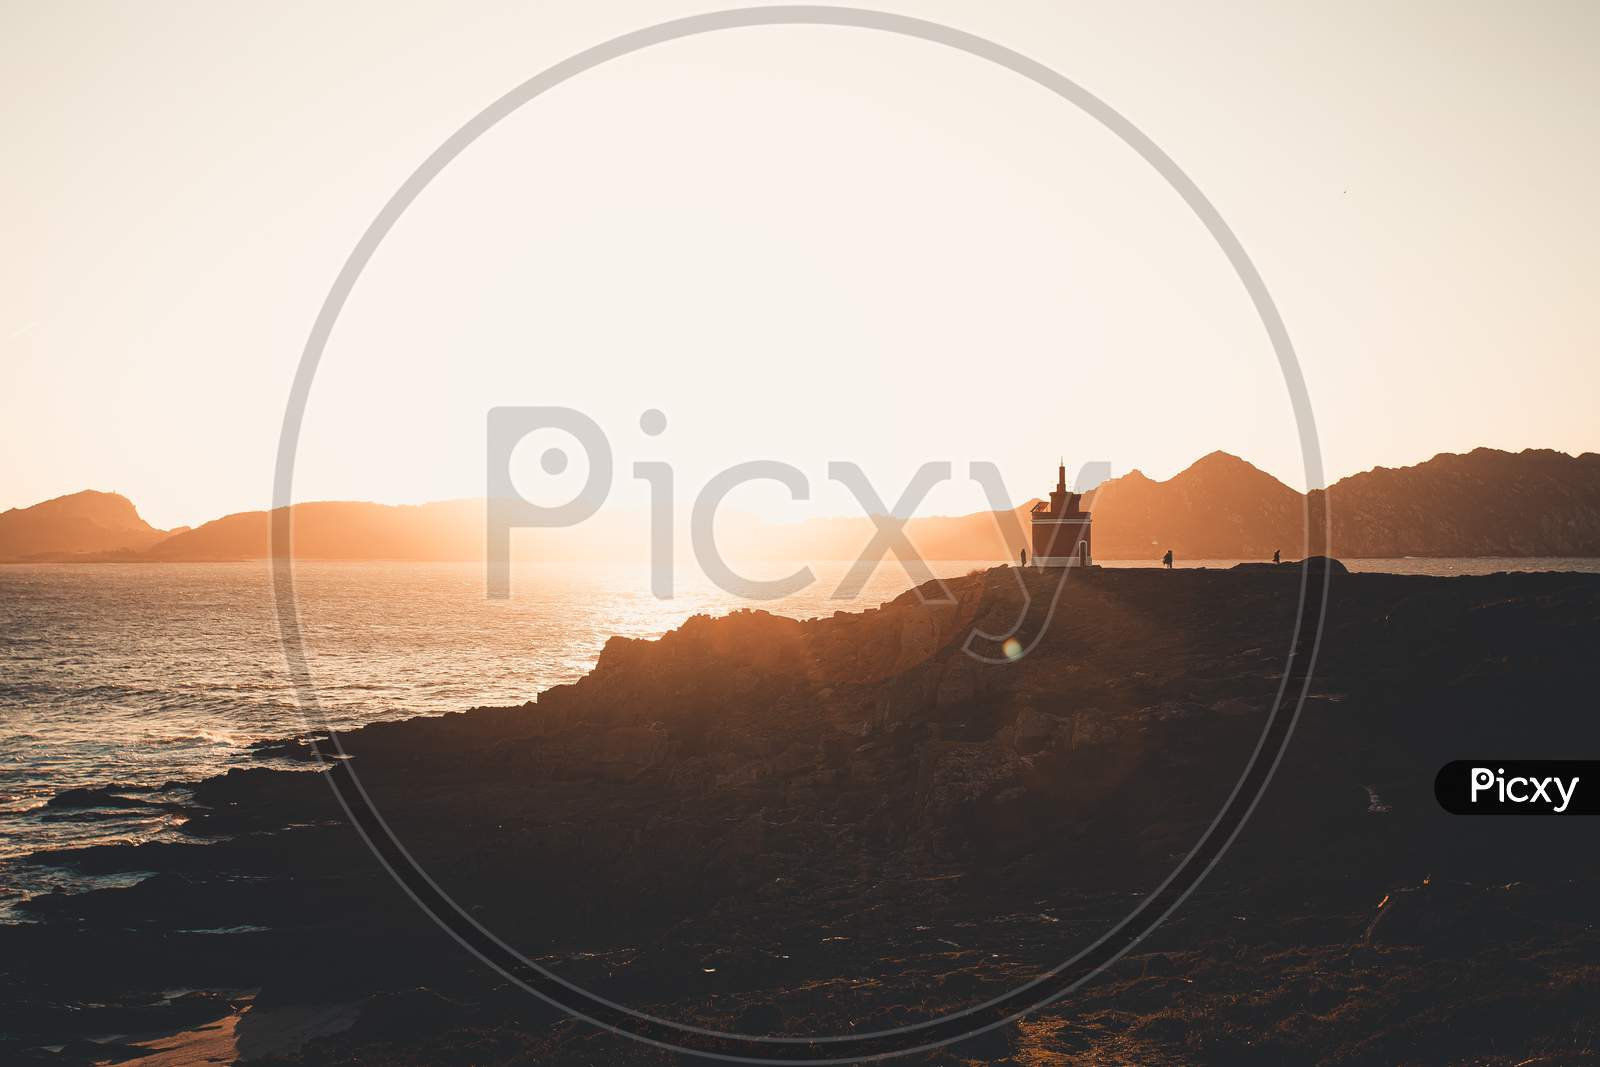 Red Lighthouse Under A Massive Sunset In The Coastline Of Spain During A Super Bright Day With Copy Space